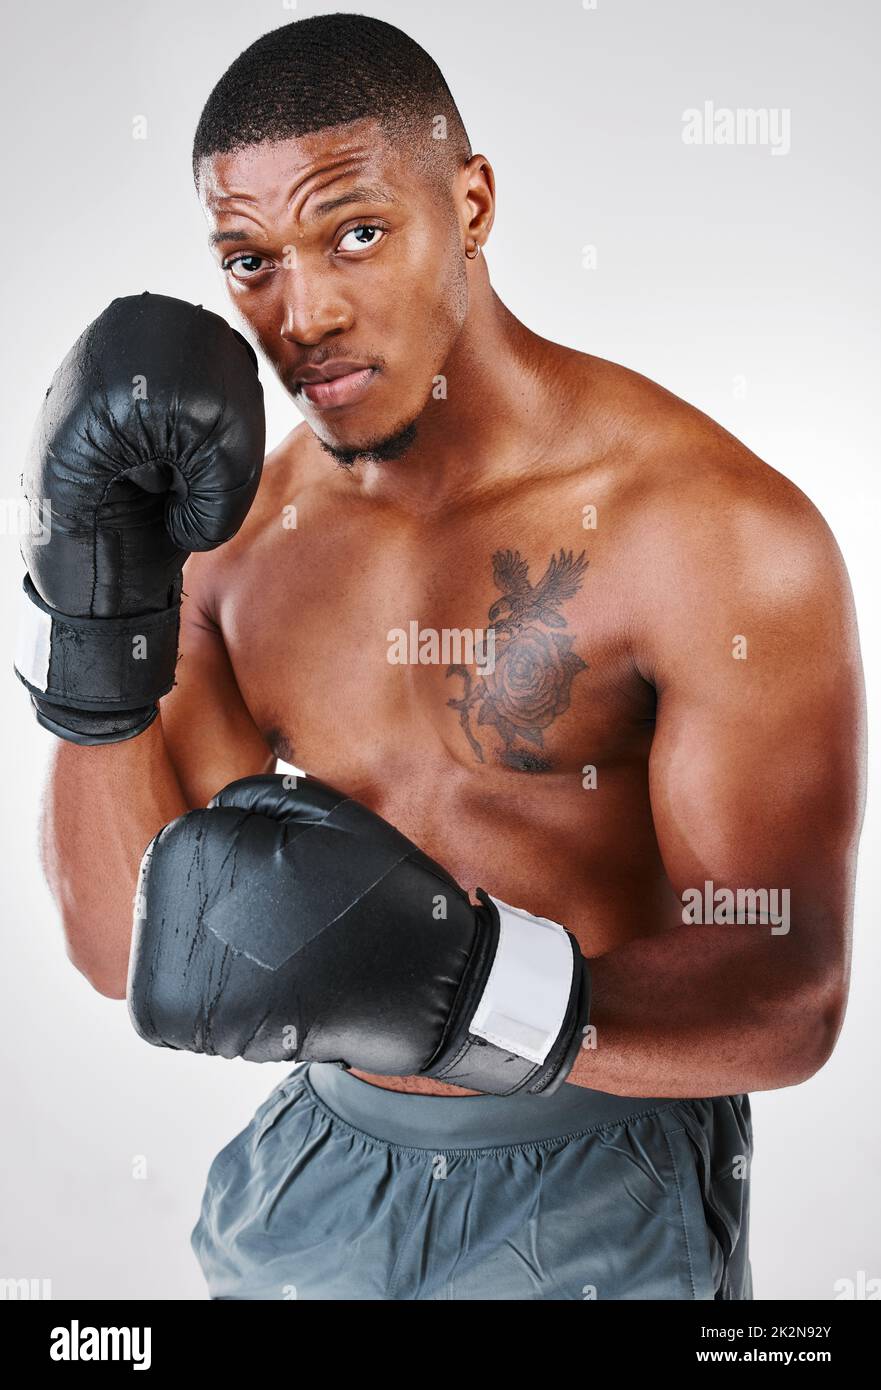 Ill enjoy it when you stumble. Studio portrait of a young shirtless man posing with boxing gloves against a white background. Stock Photo